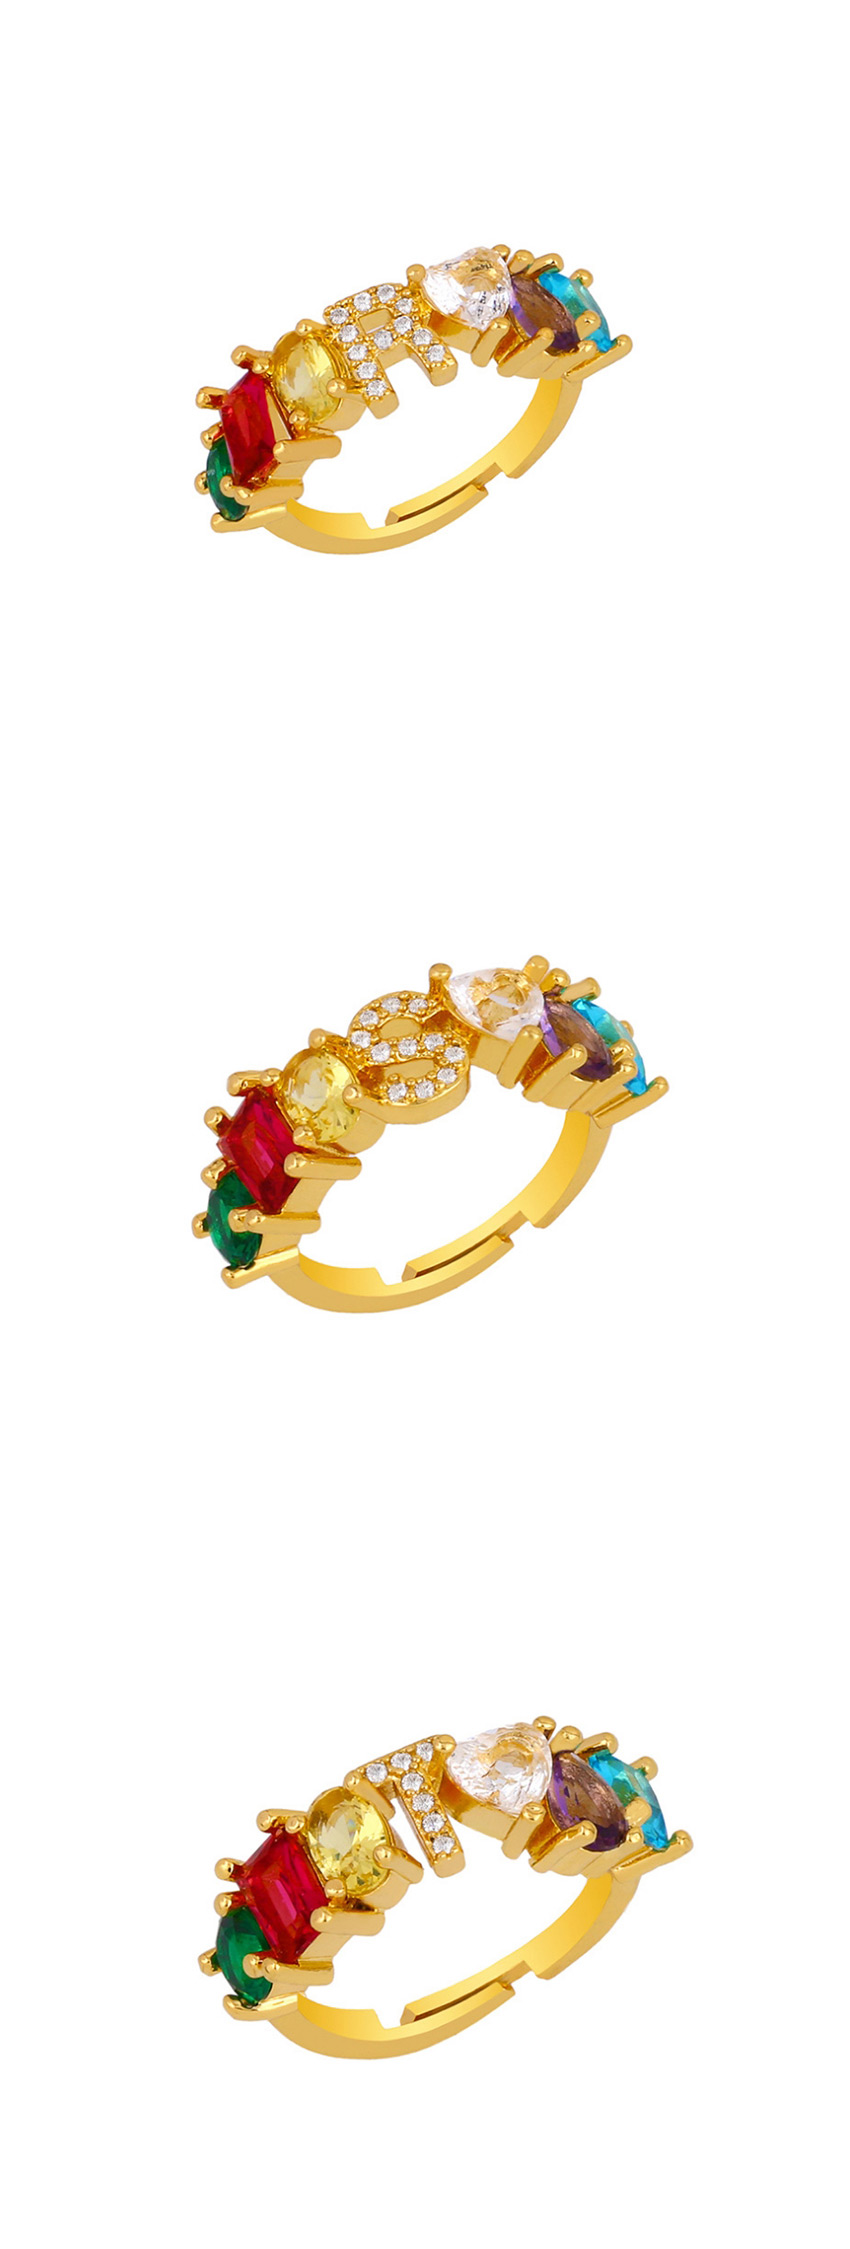 Fashion R Gold Heart-shaped Adjustable Ring With Colorful Diamond Letters,Rings